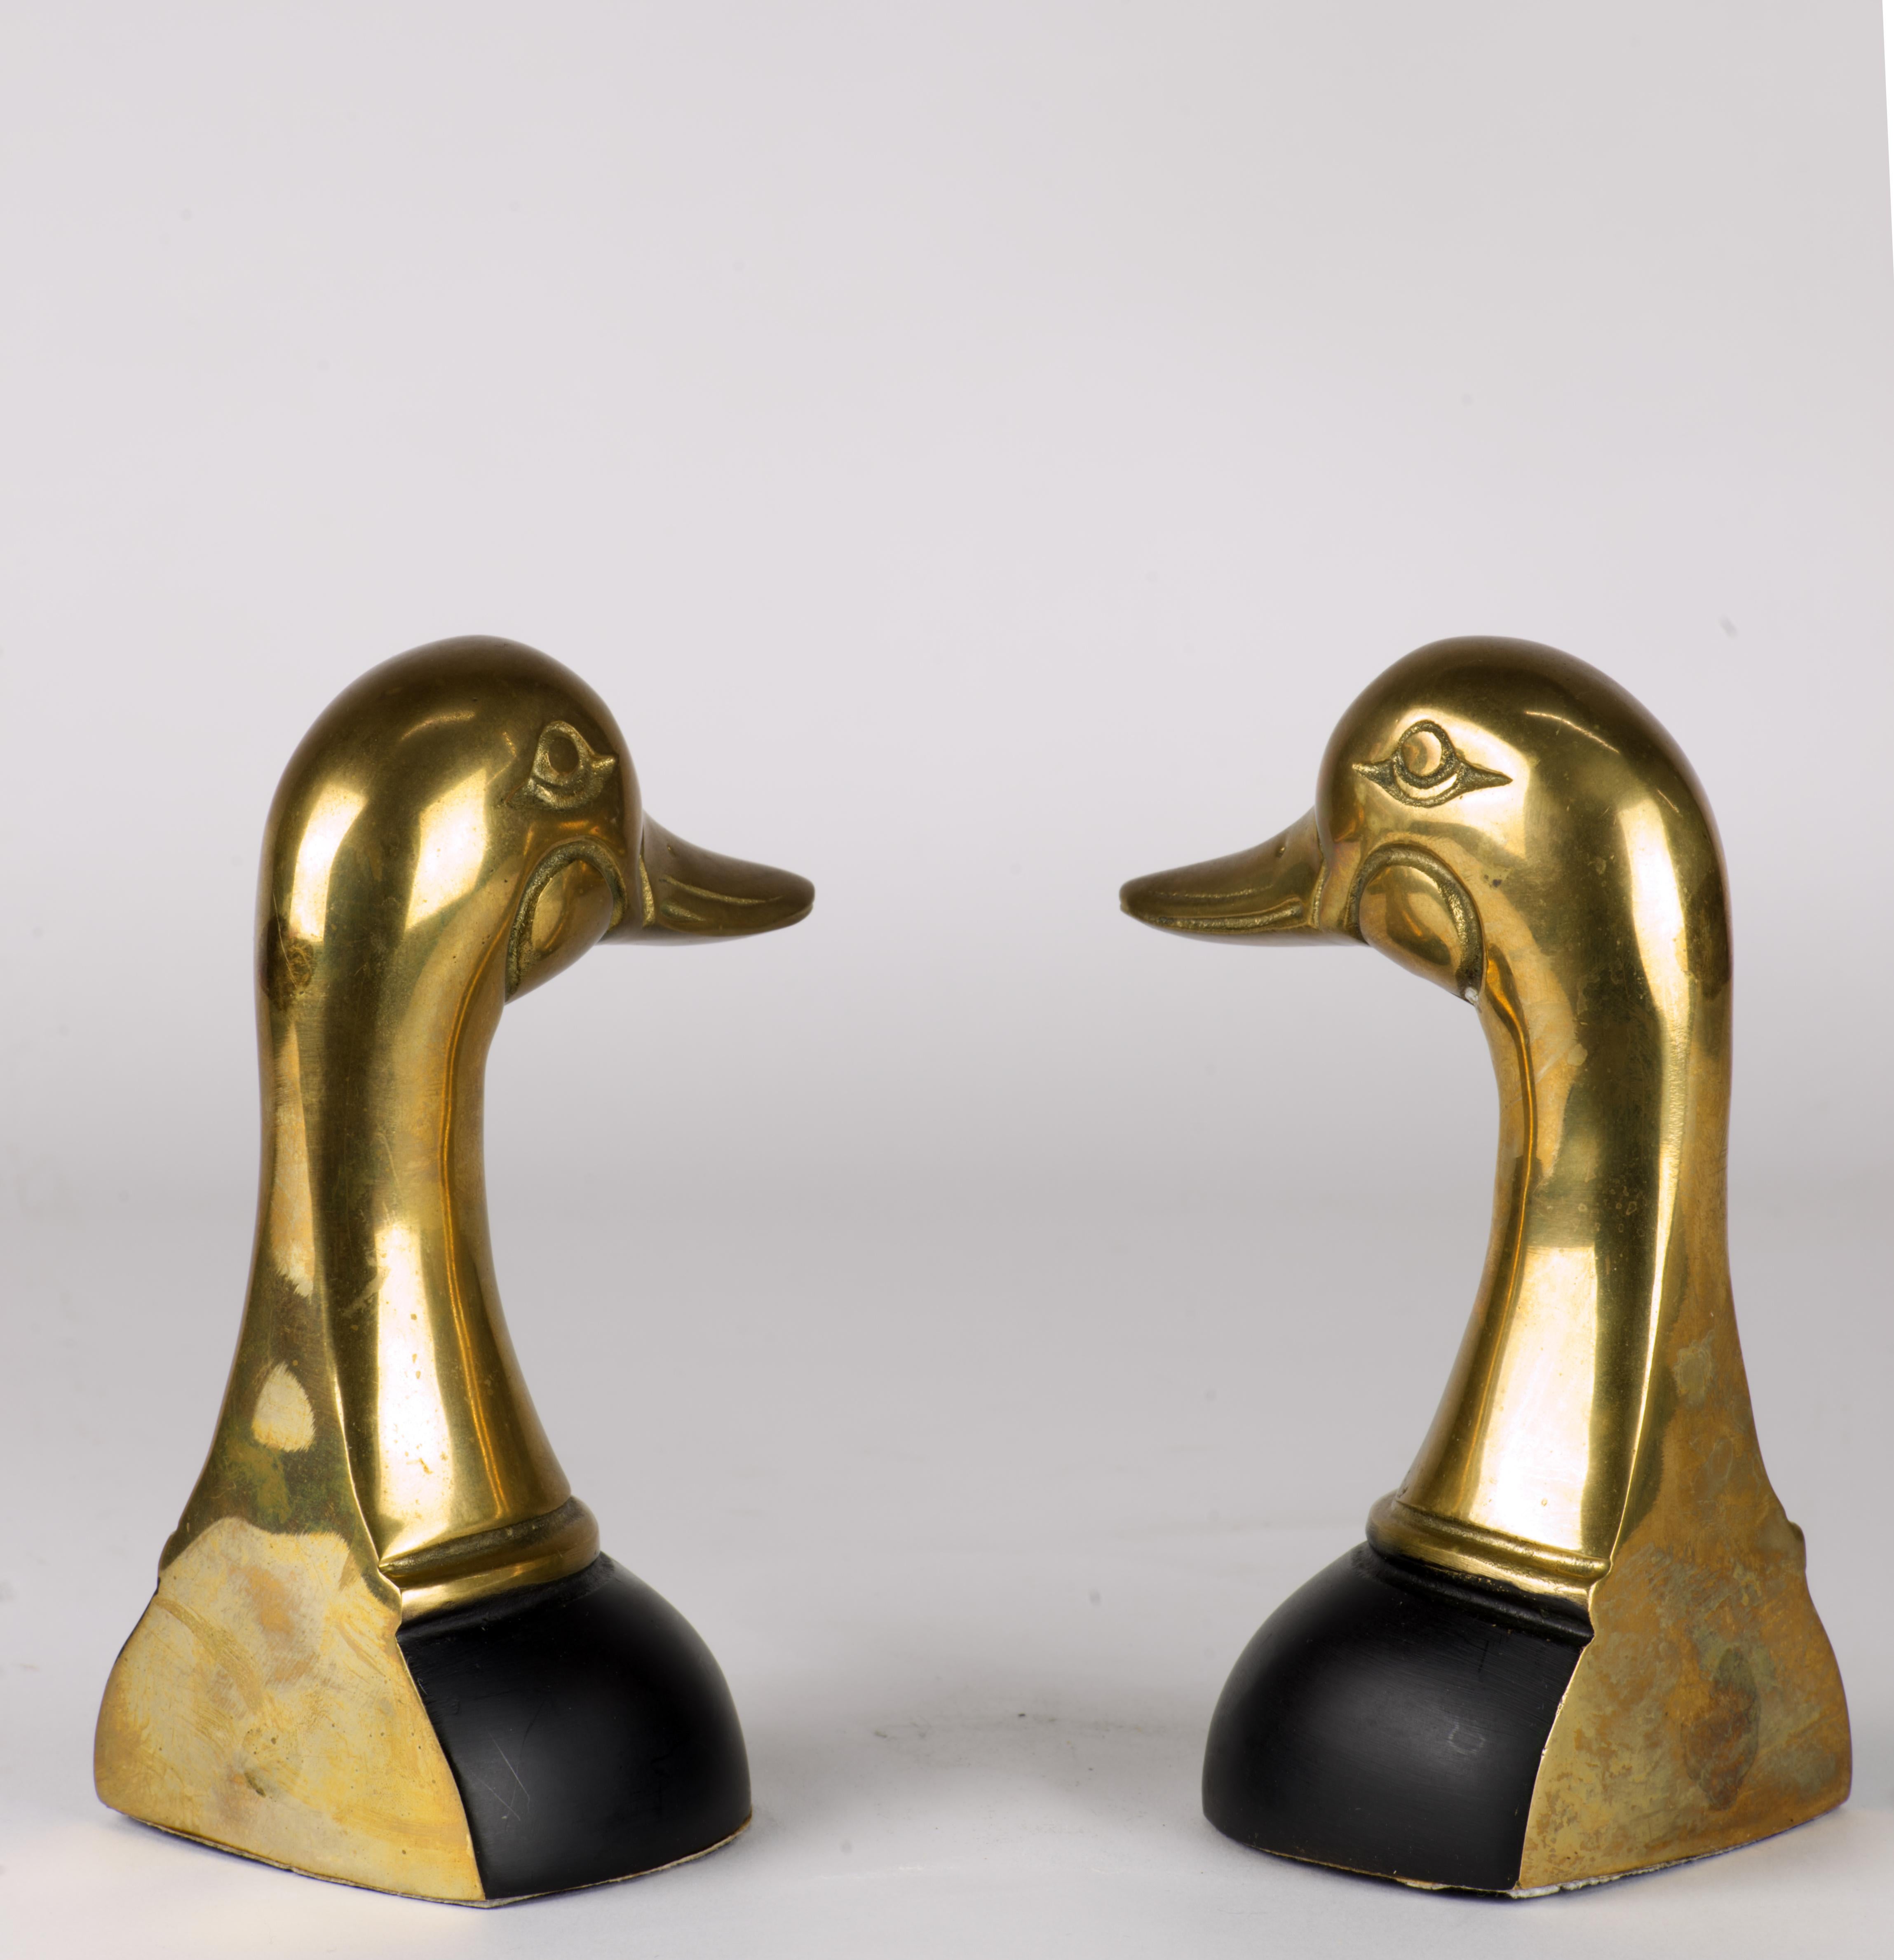 Pair of Cast Brass Mallard Duck Bookends Mid Century Modern In Good Condition For Sale In Clifton Springs, NY